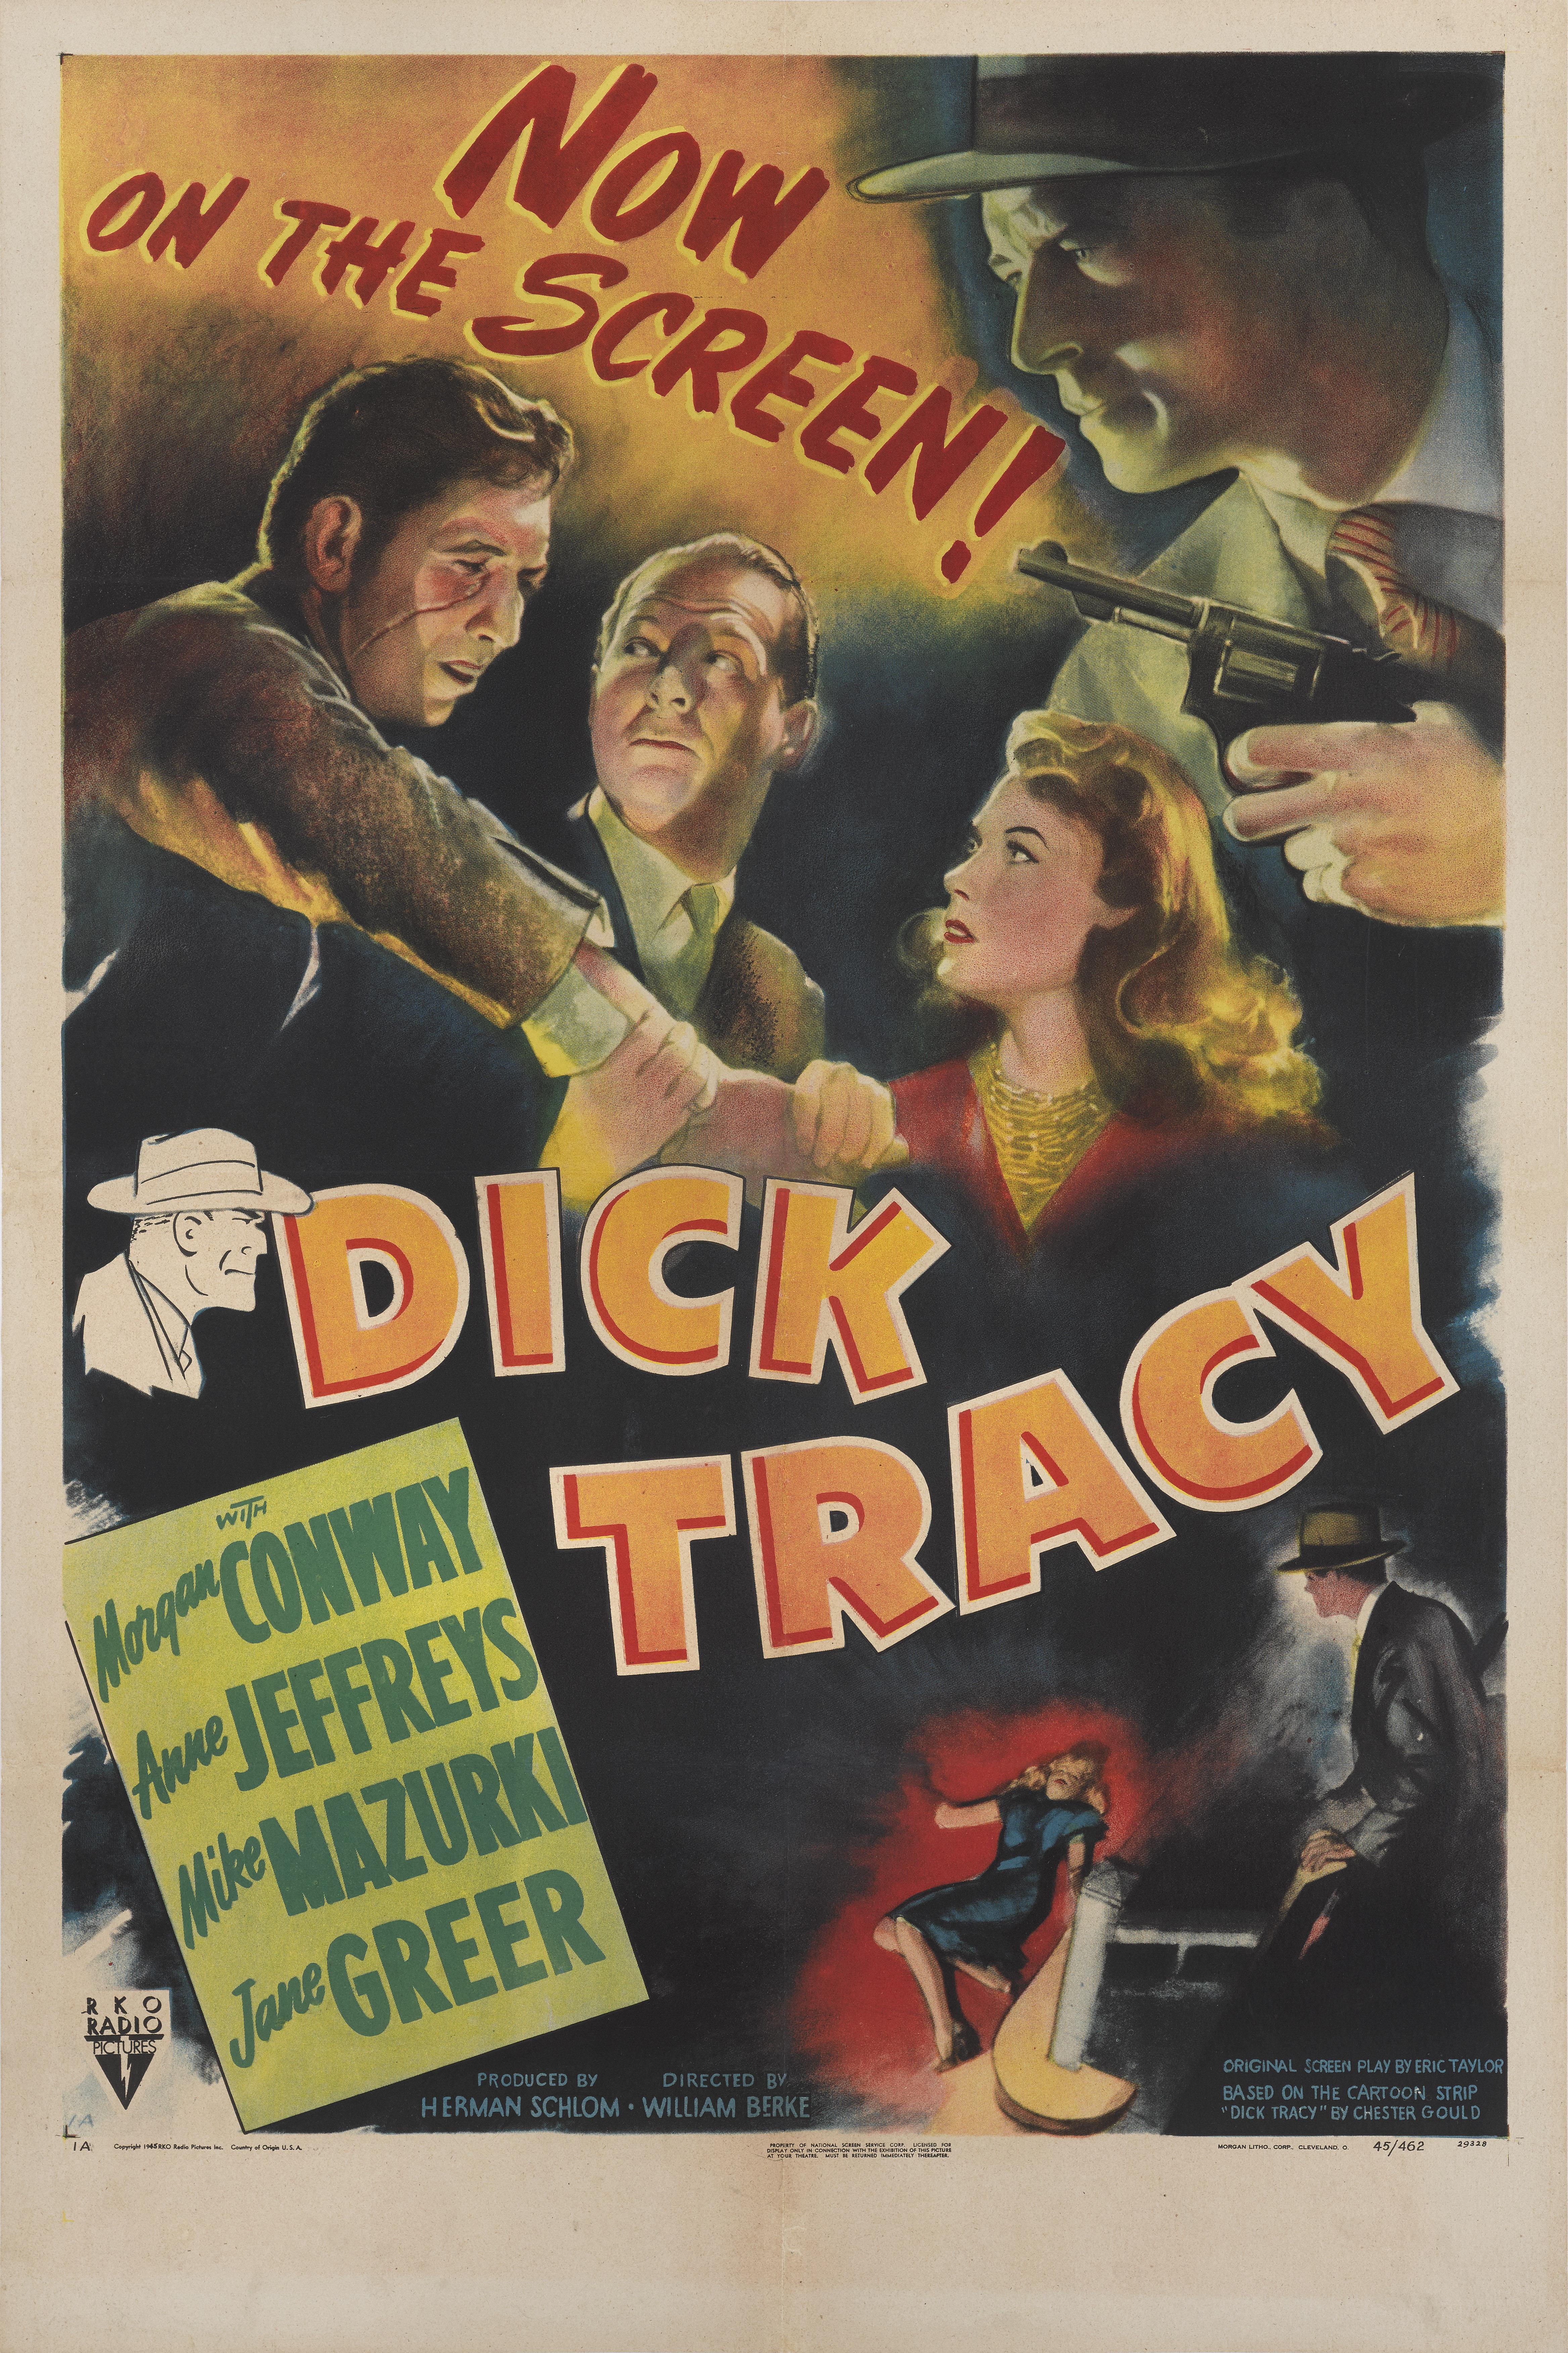 Original US film poster for the 1945 action detective film Dick Tracy.
This film starred Morgan Conway, Anne Jeffreys and Mike Mazurki, and was directed by William Berke.
This poster is conservation linen backed.
This piece is in excellent